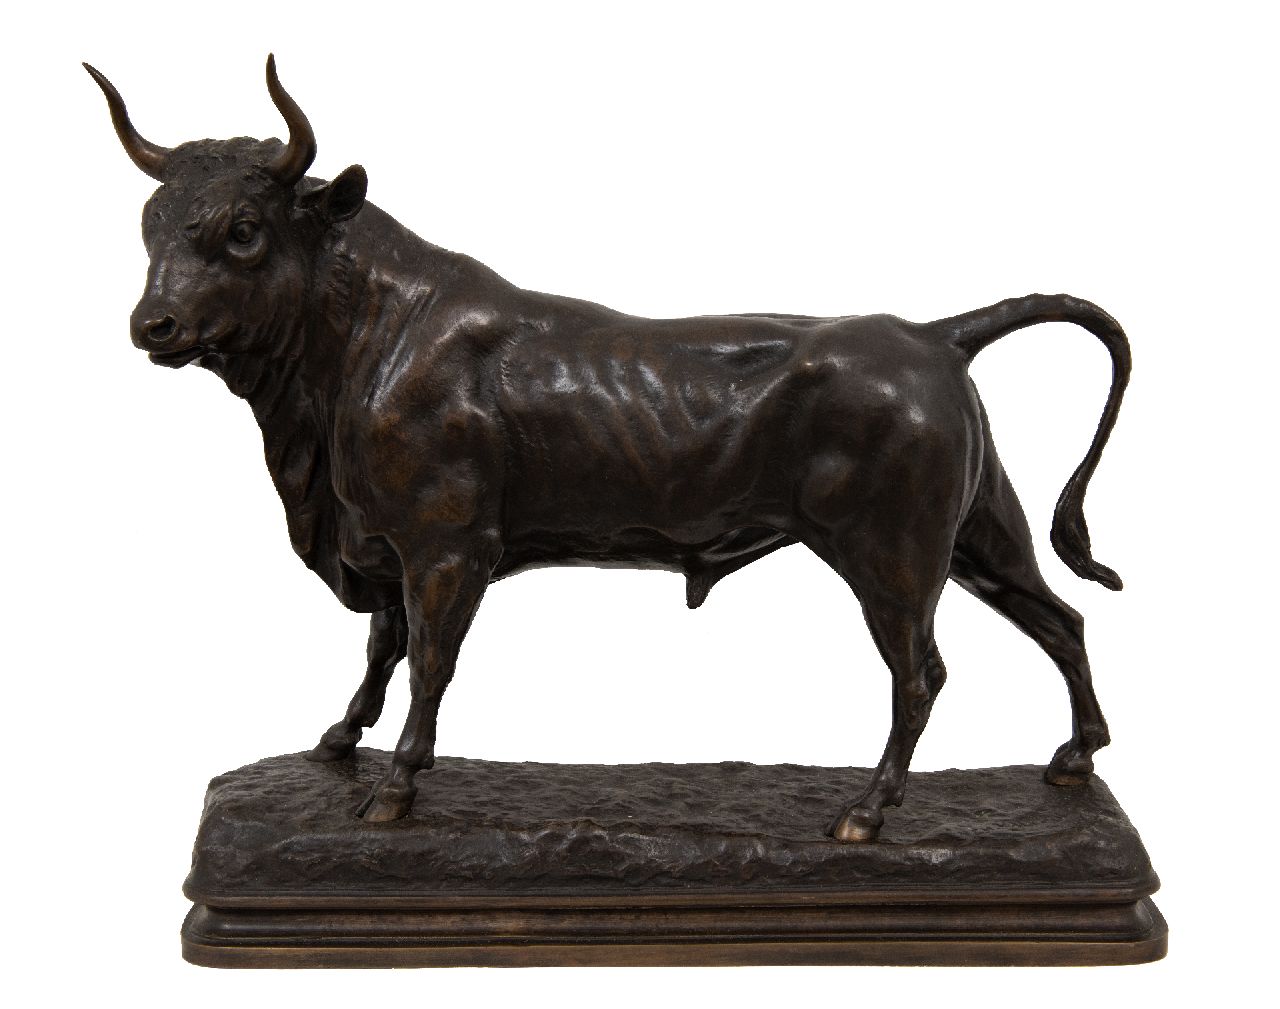 Valton C.  | Charles Valton | Sculptures and objects offered for sale | Bull, bronze 34.0 x 39.0 cm, signed on the base